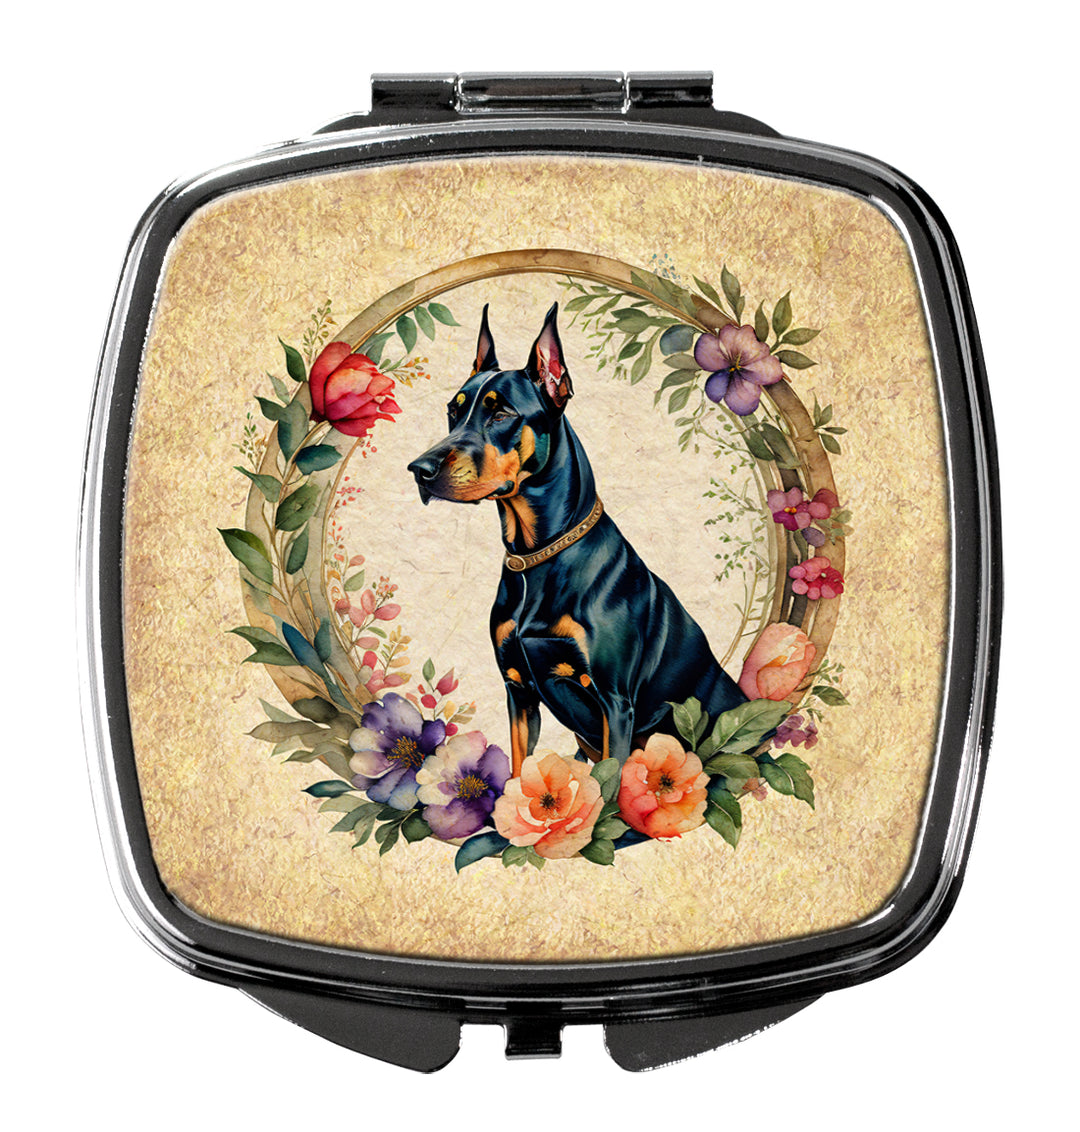 Yorkshire Terrier and Flowers Compact Mirror Image 8